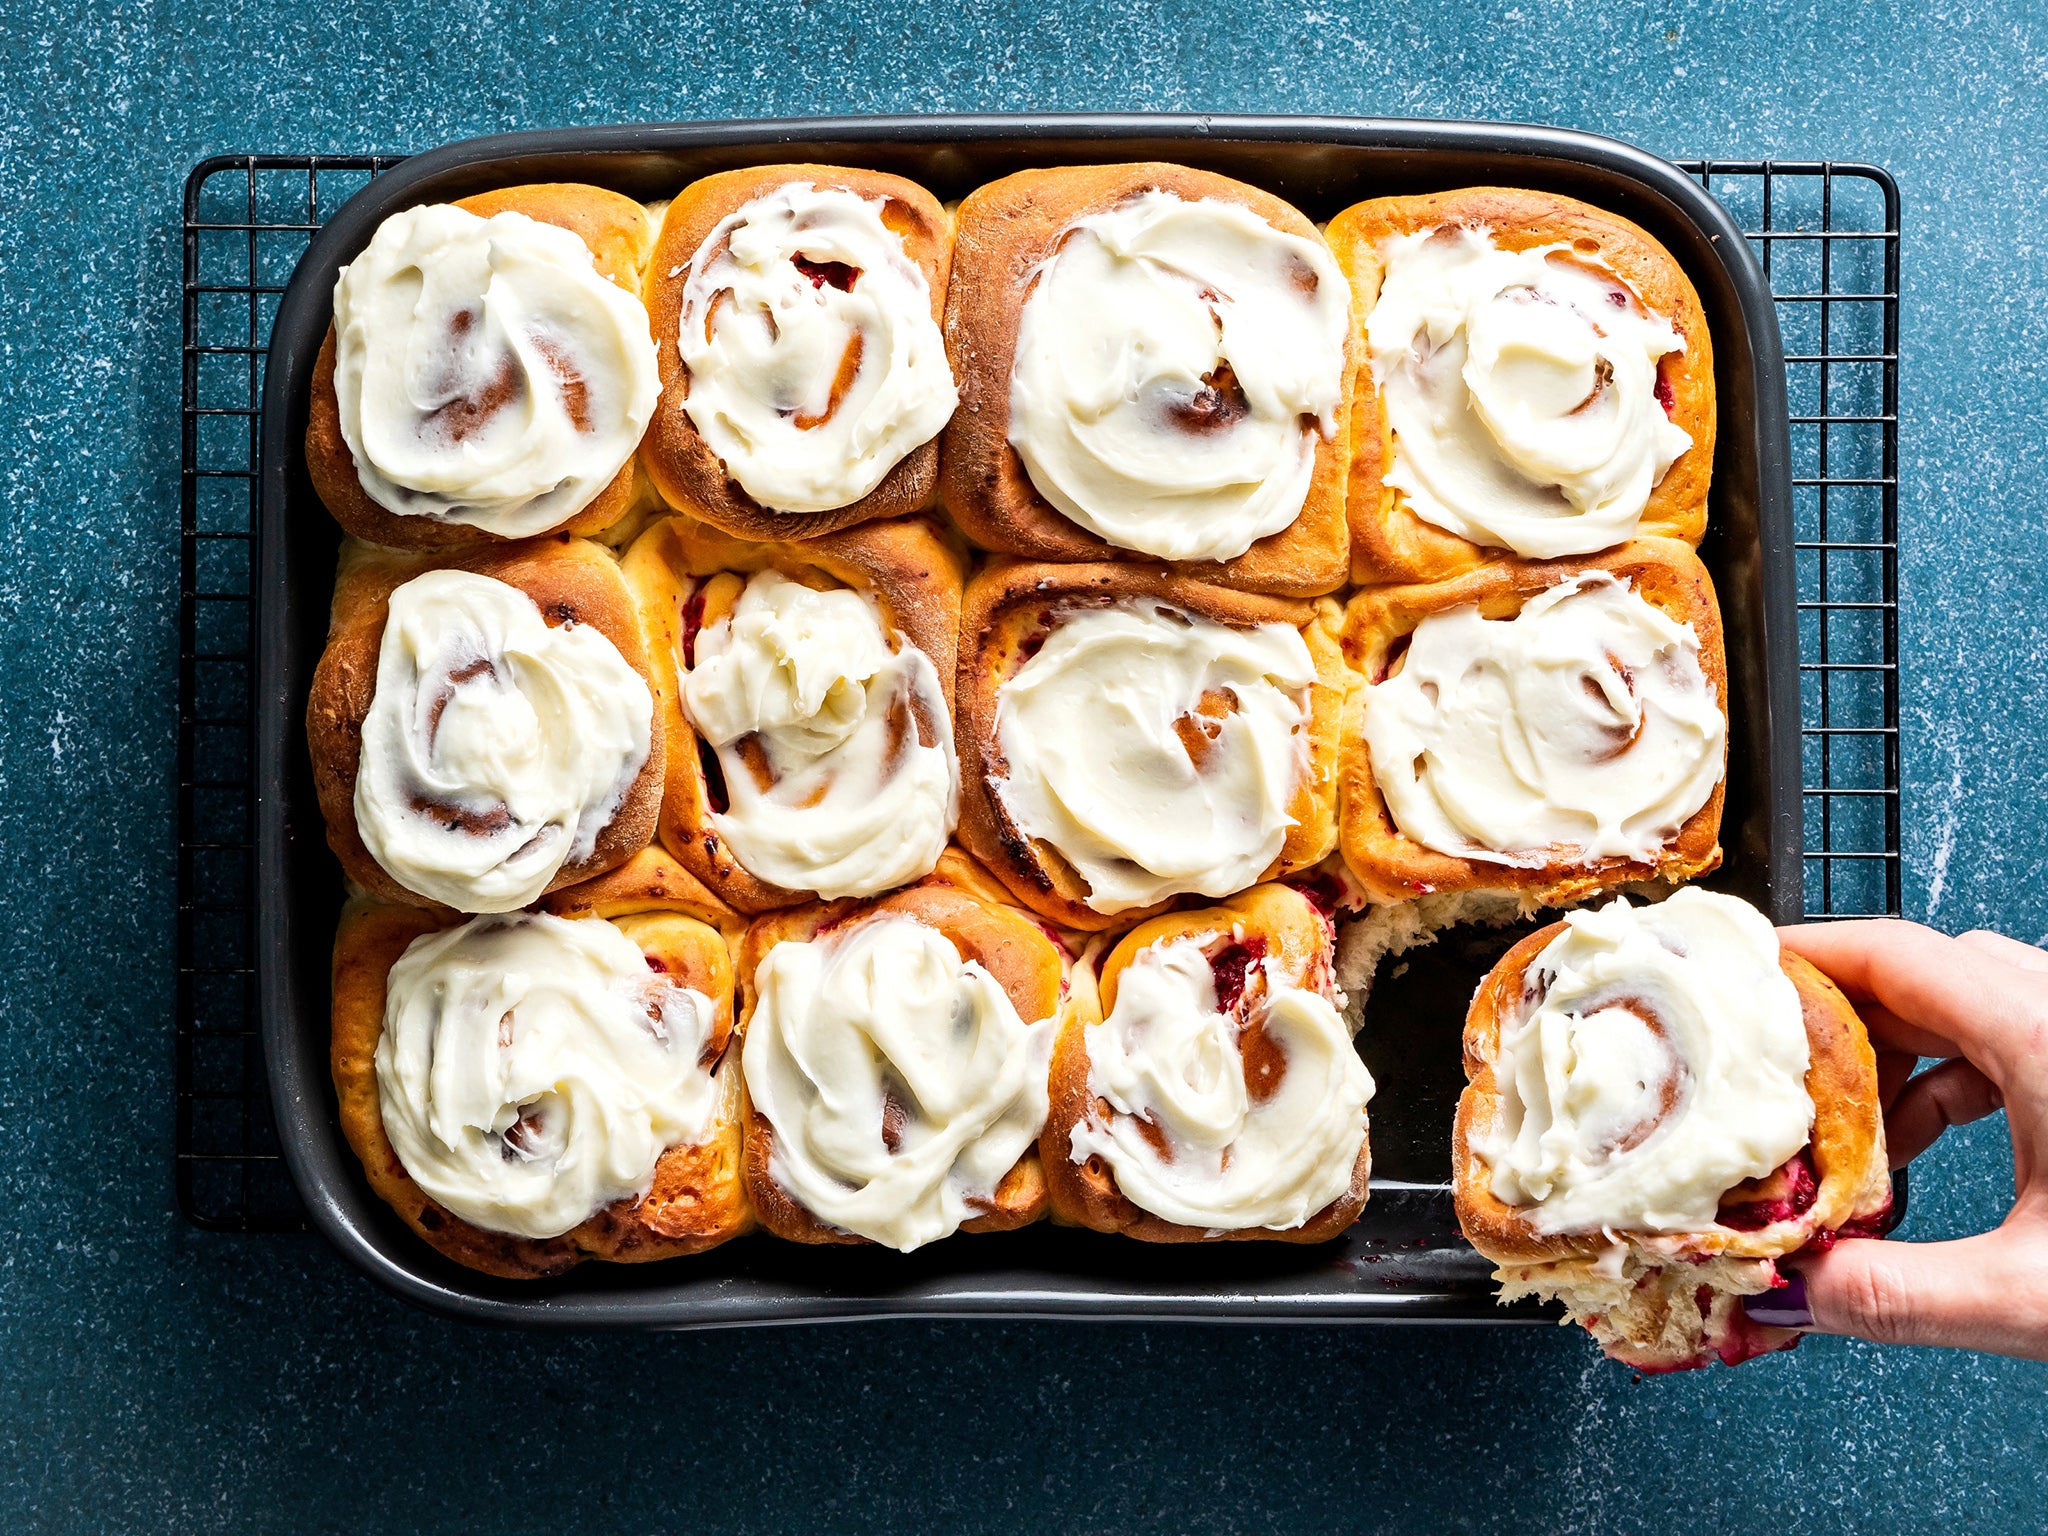 Topped with cream cheese frosting straight out of the oven, these rolls are perfect for cold mornings